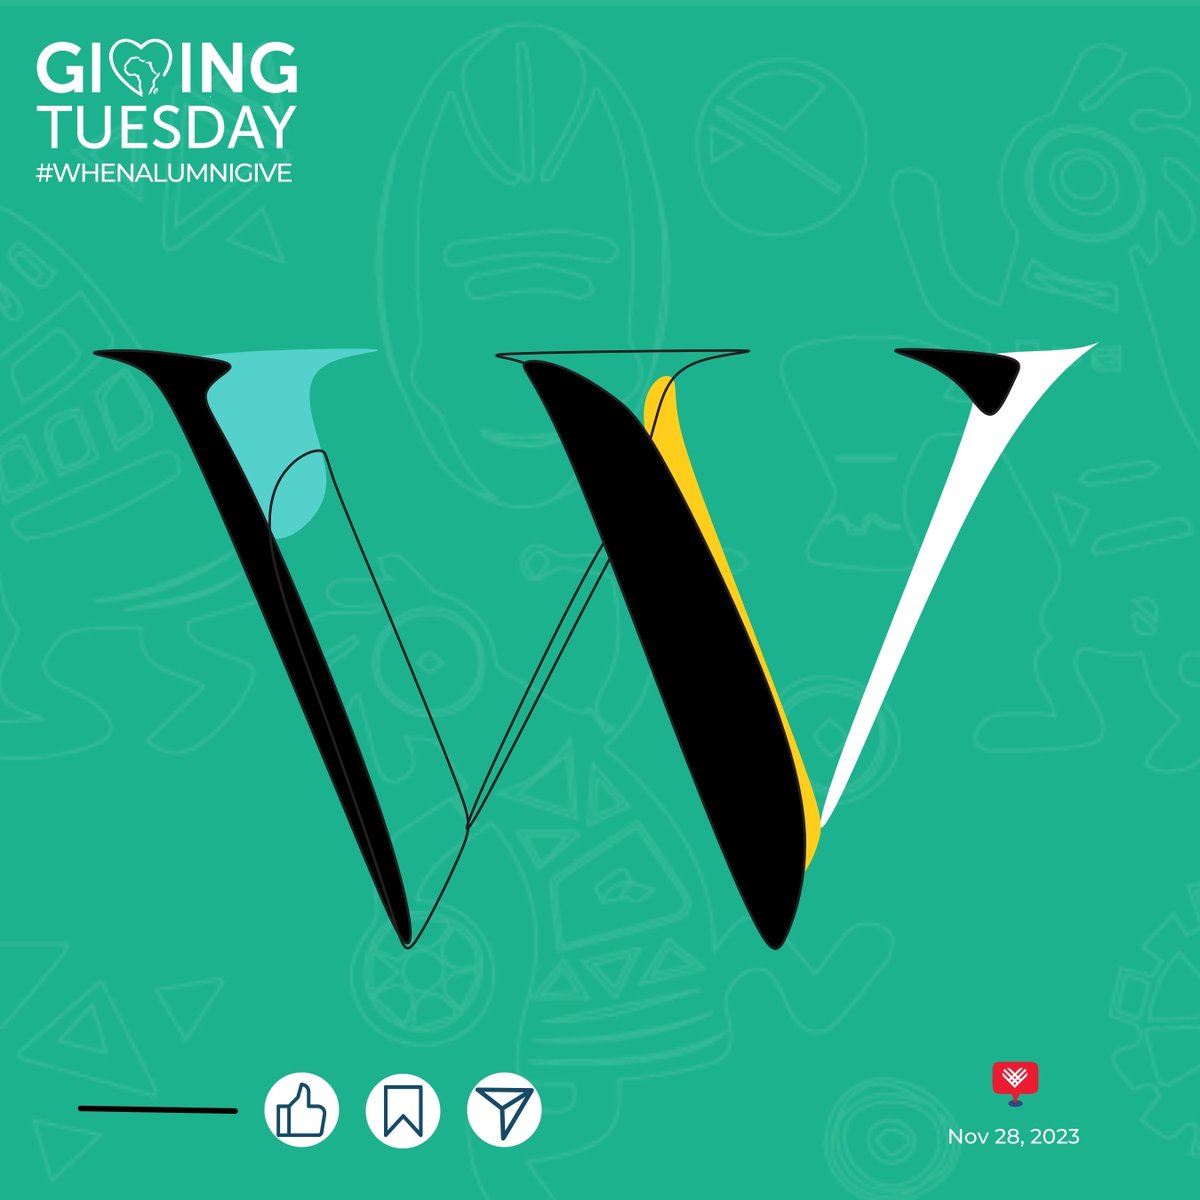 'Wonders unfold in our schools, forming the foundation of our society. But what happens #WhenAlumniGive?'.
.
.
.
#GivingTuesday #GivingTuesdayAfrica #UbuntuGiving
#AfricanPhilanthropy #CommunityEmpowerment